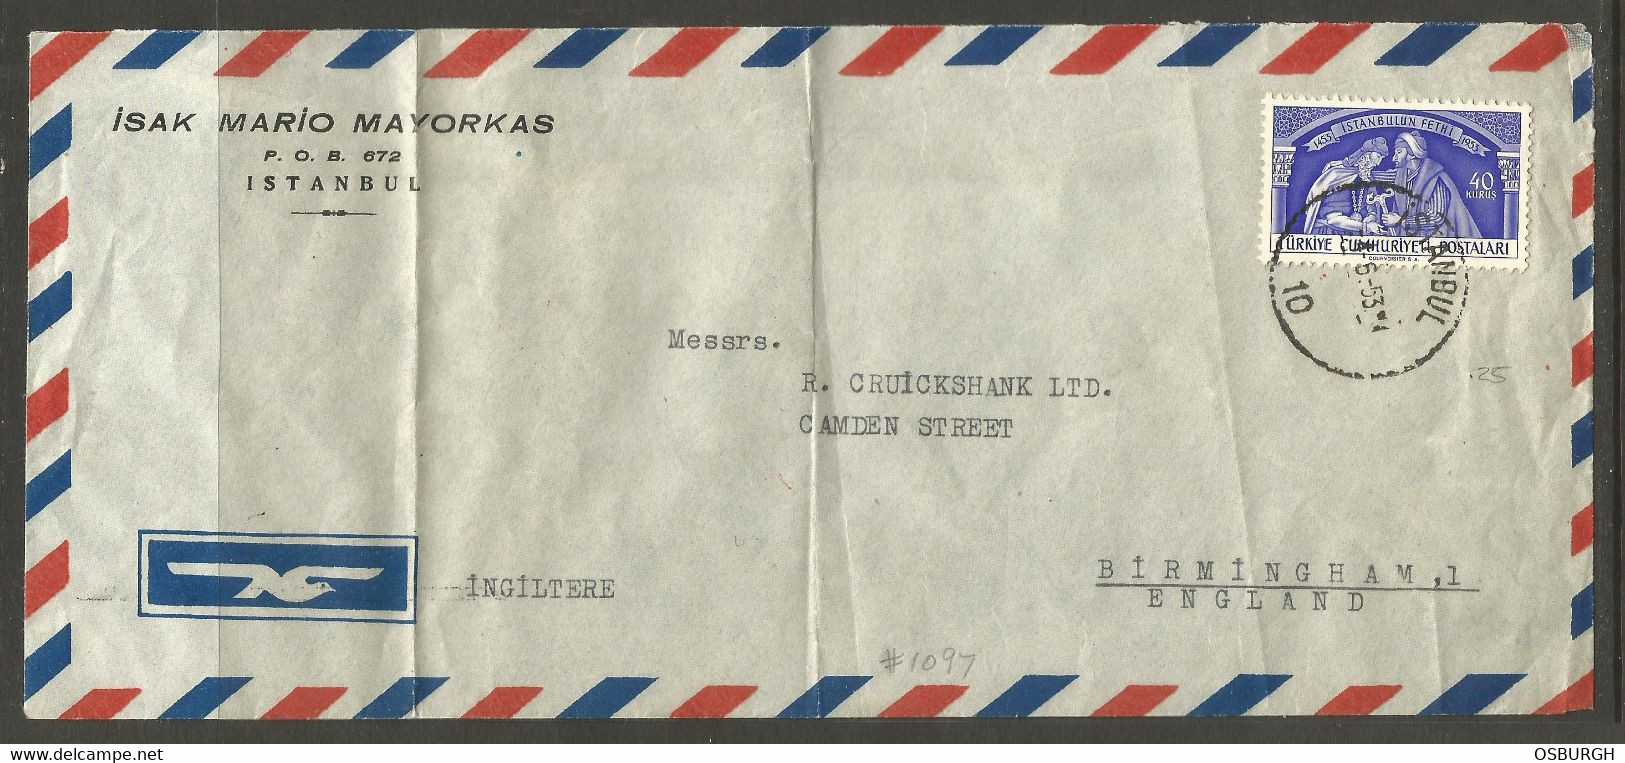 TURKEY. 1953. AIR MAIL COVER. ISTANBUL. ISAK MARIO MAYORKAS. ADDRESSED TO BIRMINGHAM. - Lettres & Documents